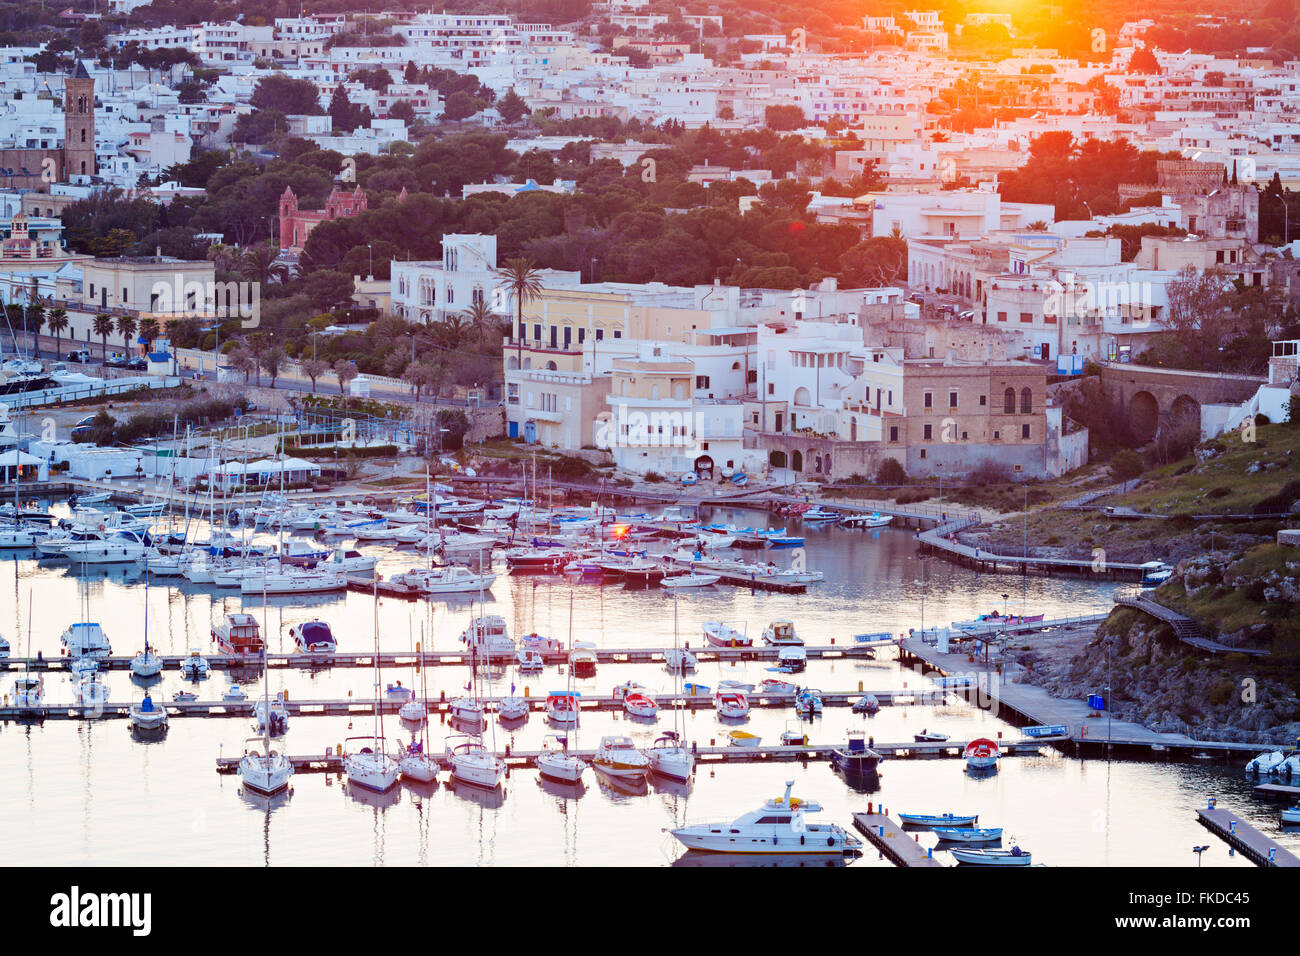 Townscape of Santa Maria di Leuca with moored yachts in foreground Stock Photo